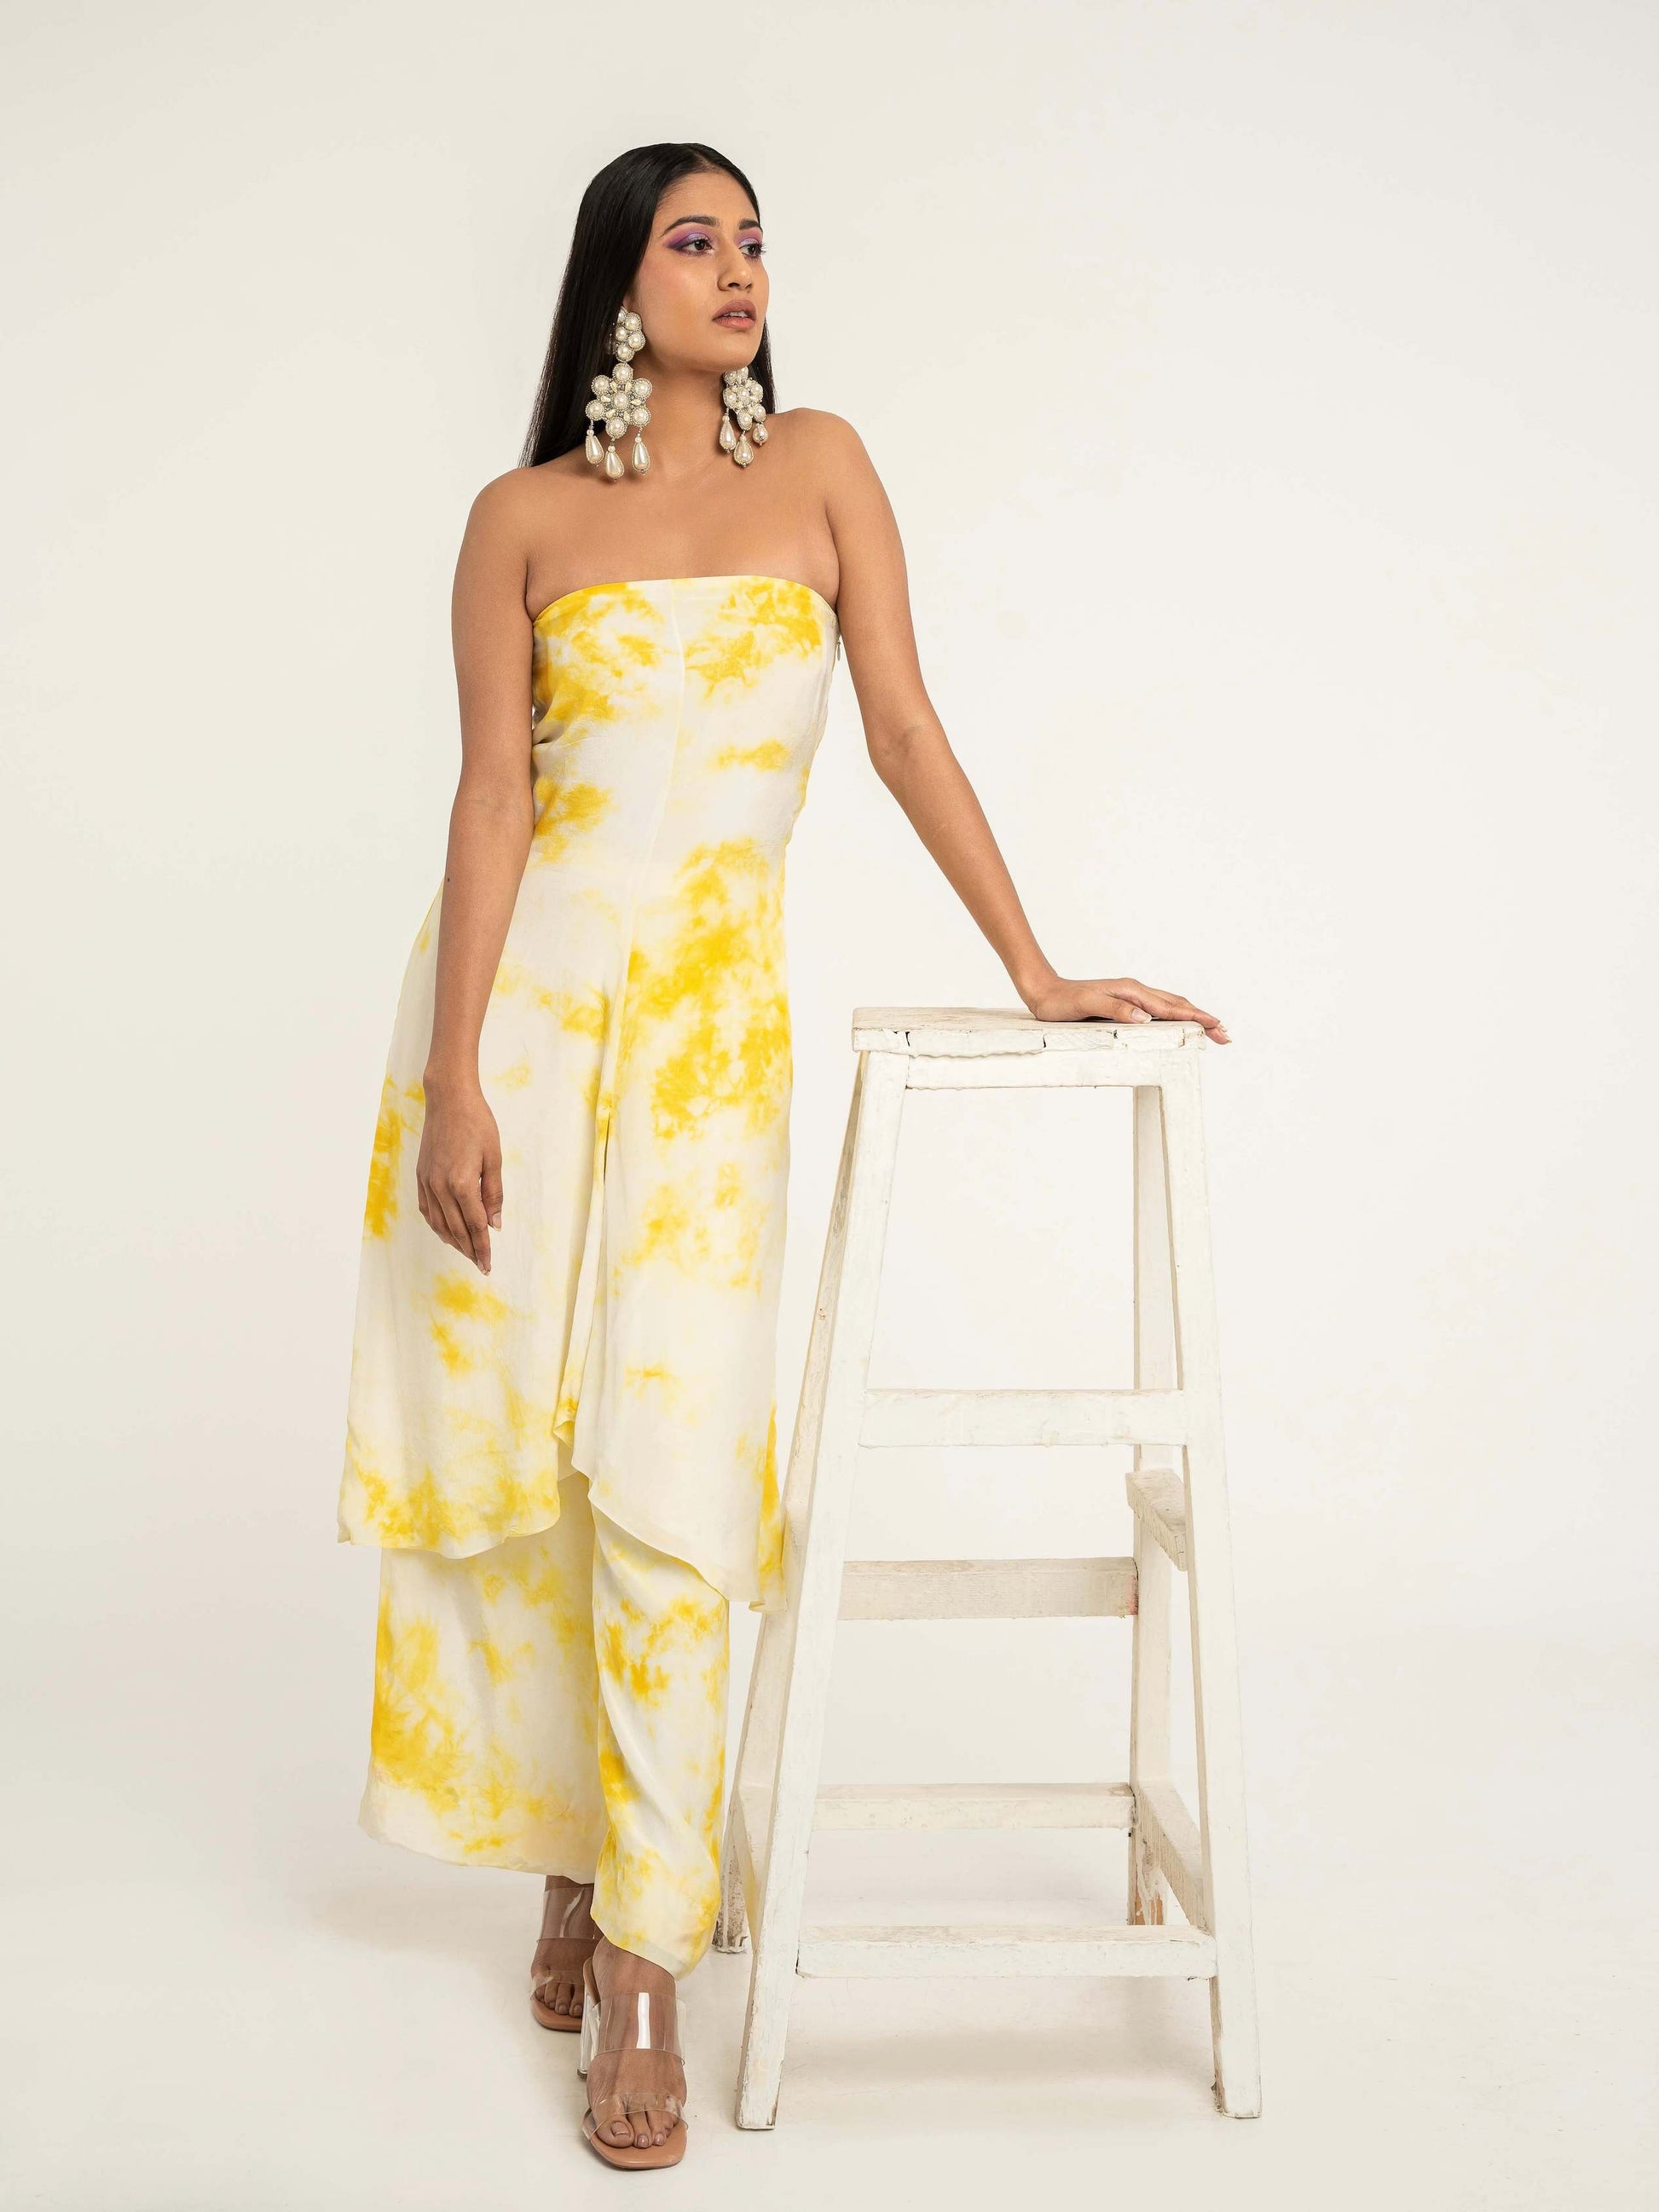 The Haldi Set consists of a strapless dress with high-waisted, elastic pants. 